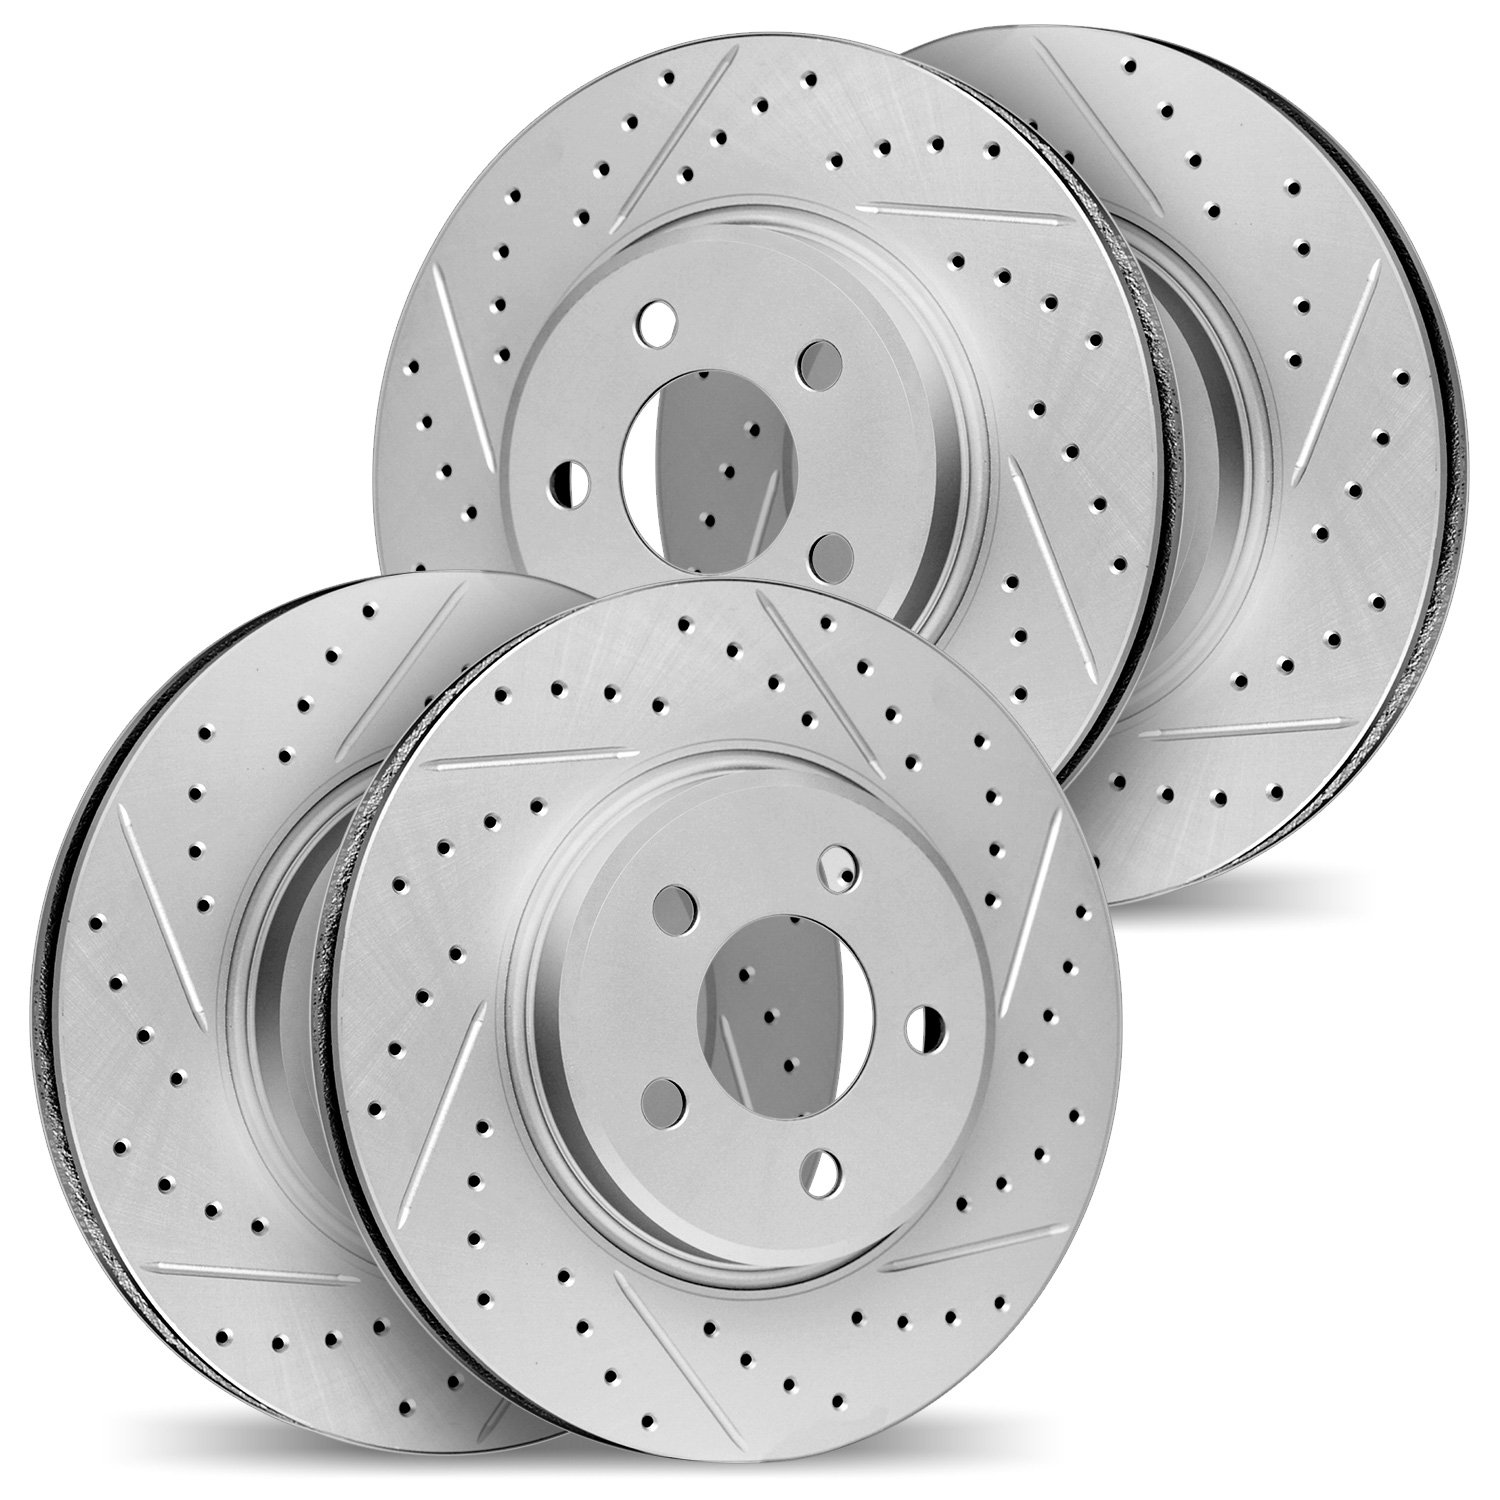 2004-16000 Geoperformance Drilled/Slotted Brake Rotors, 2017-2021 Alfa Romeo, Position: Front and Rear